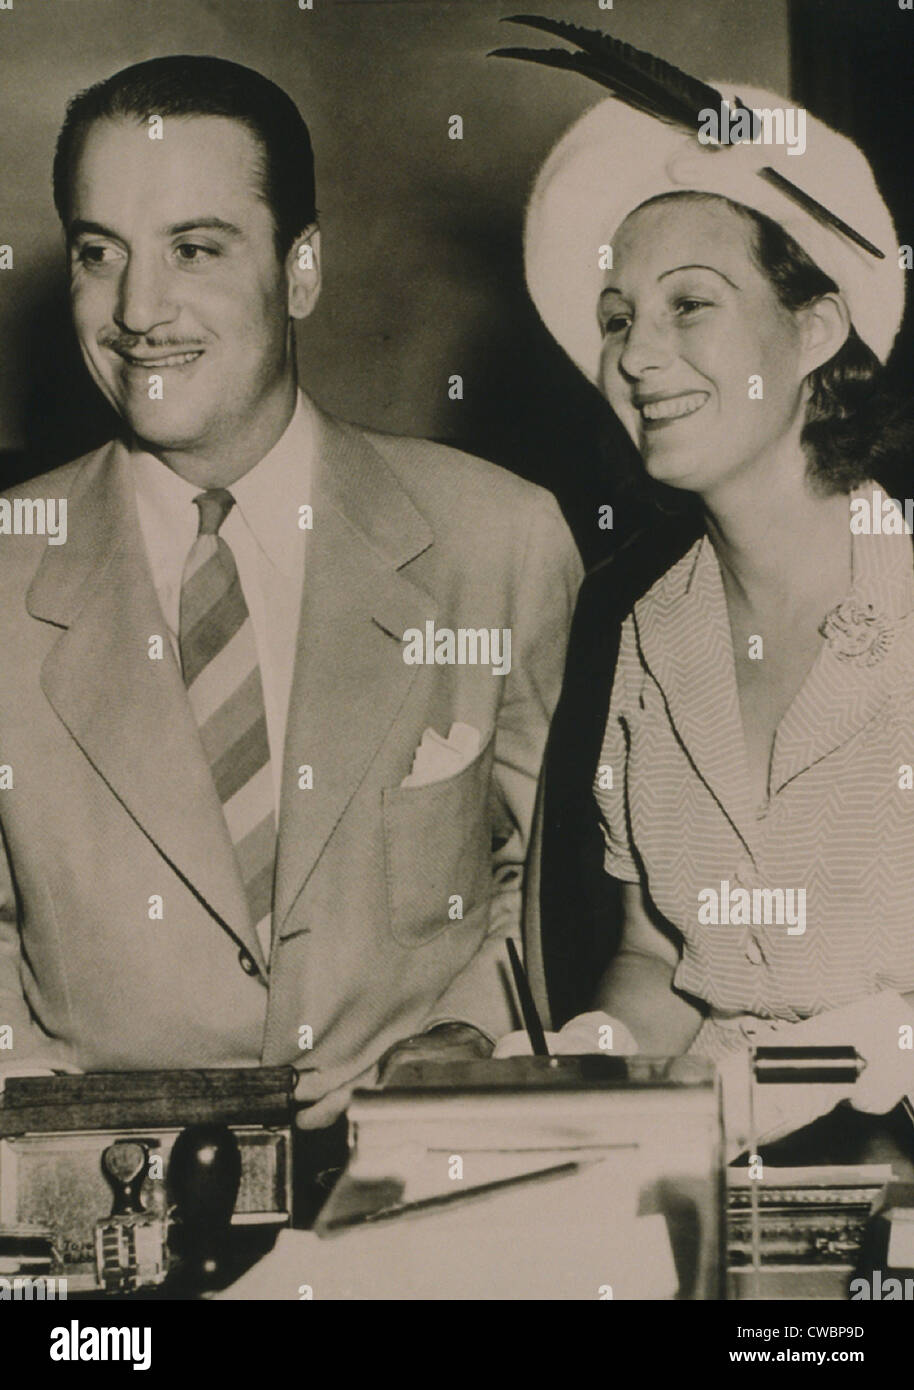 Hollywood producer, Mike Frankovich (1910-1992) and bride to be, English actress Binnie Barnes (1903-1996) in 1940. Both had Stock Photo